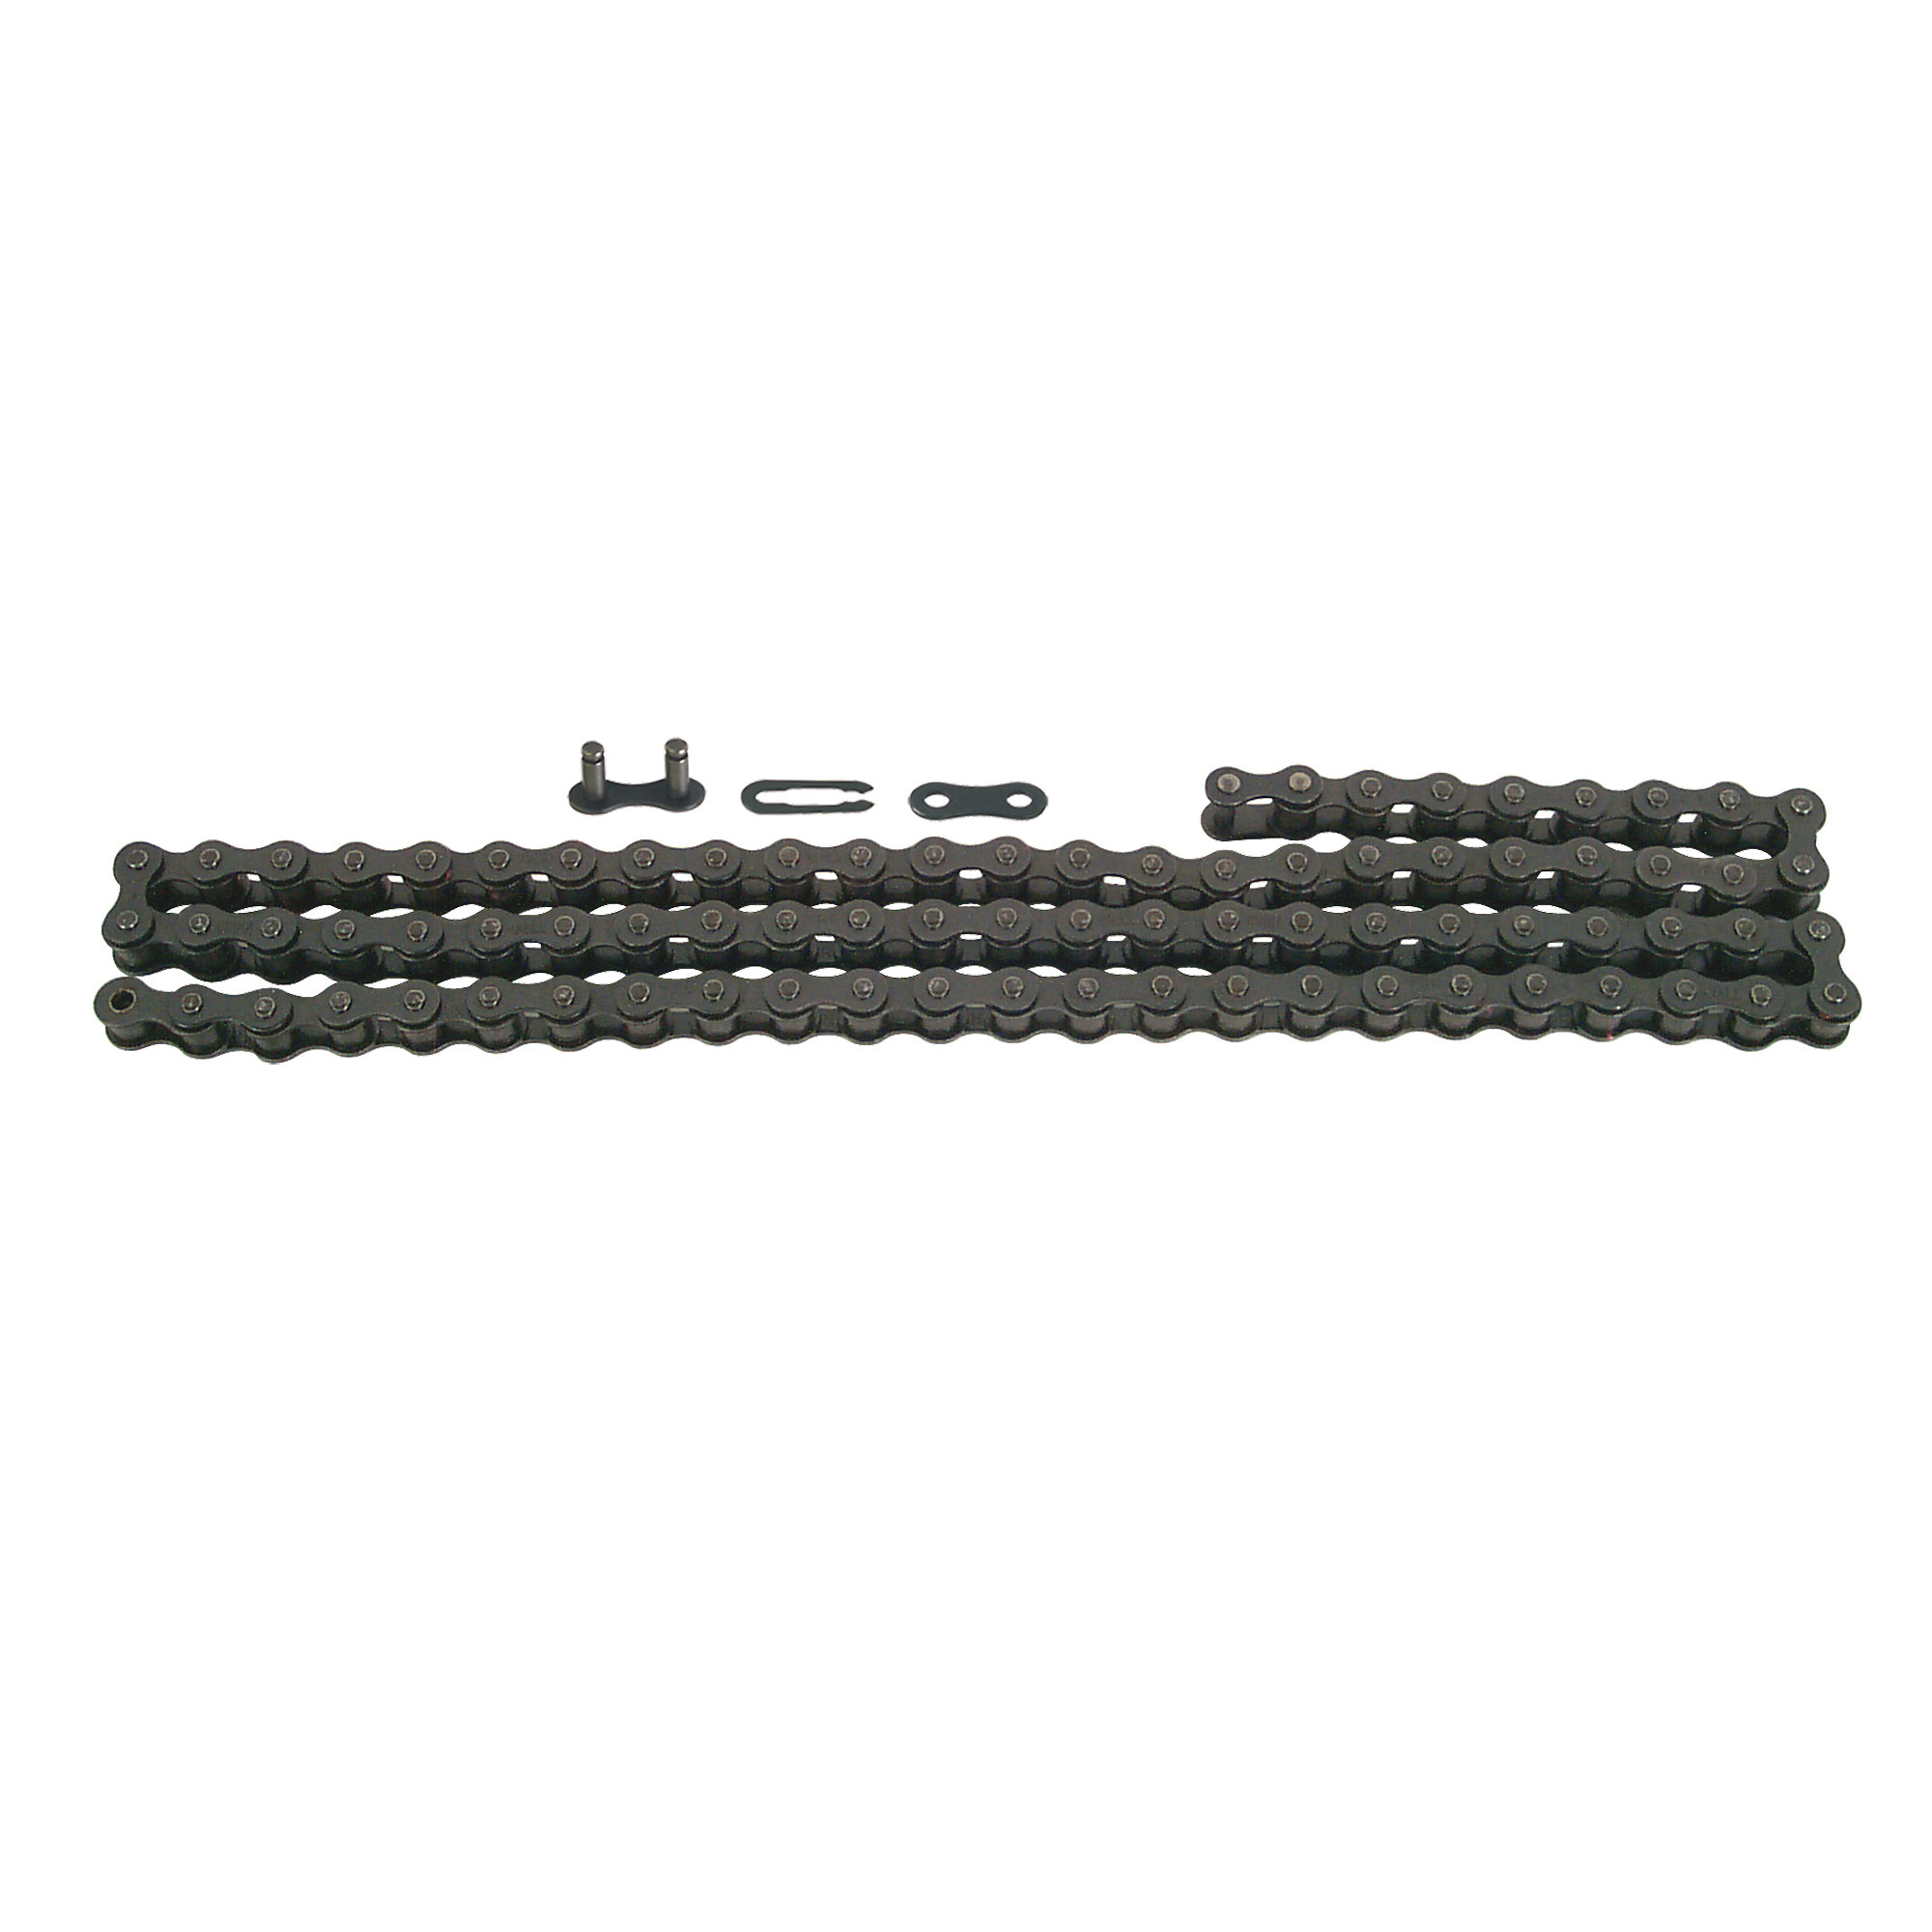 Drive Chain with Master Link, 39 3/4", Cybex/Tectrix